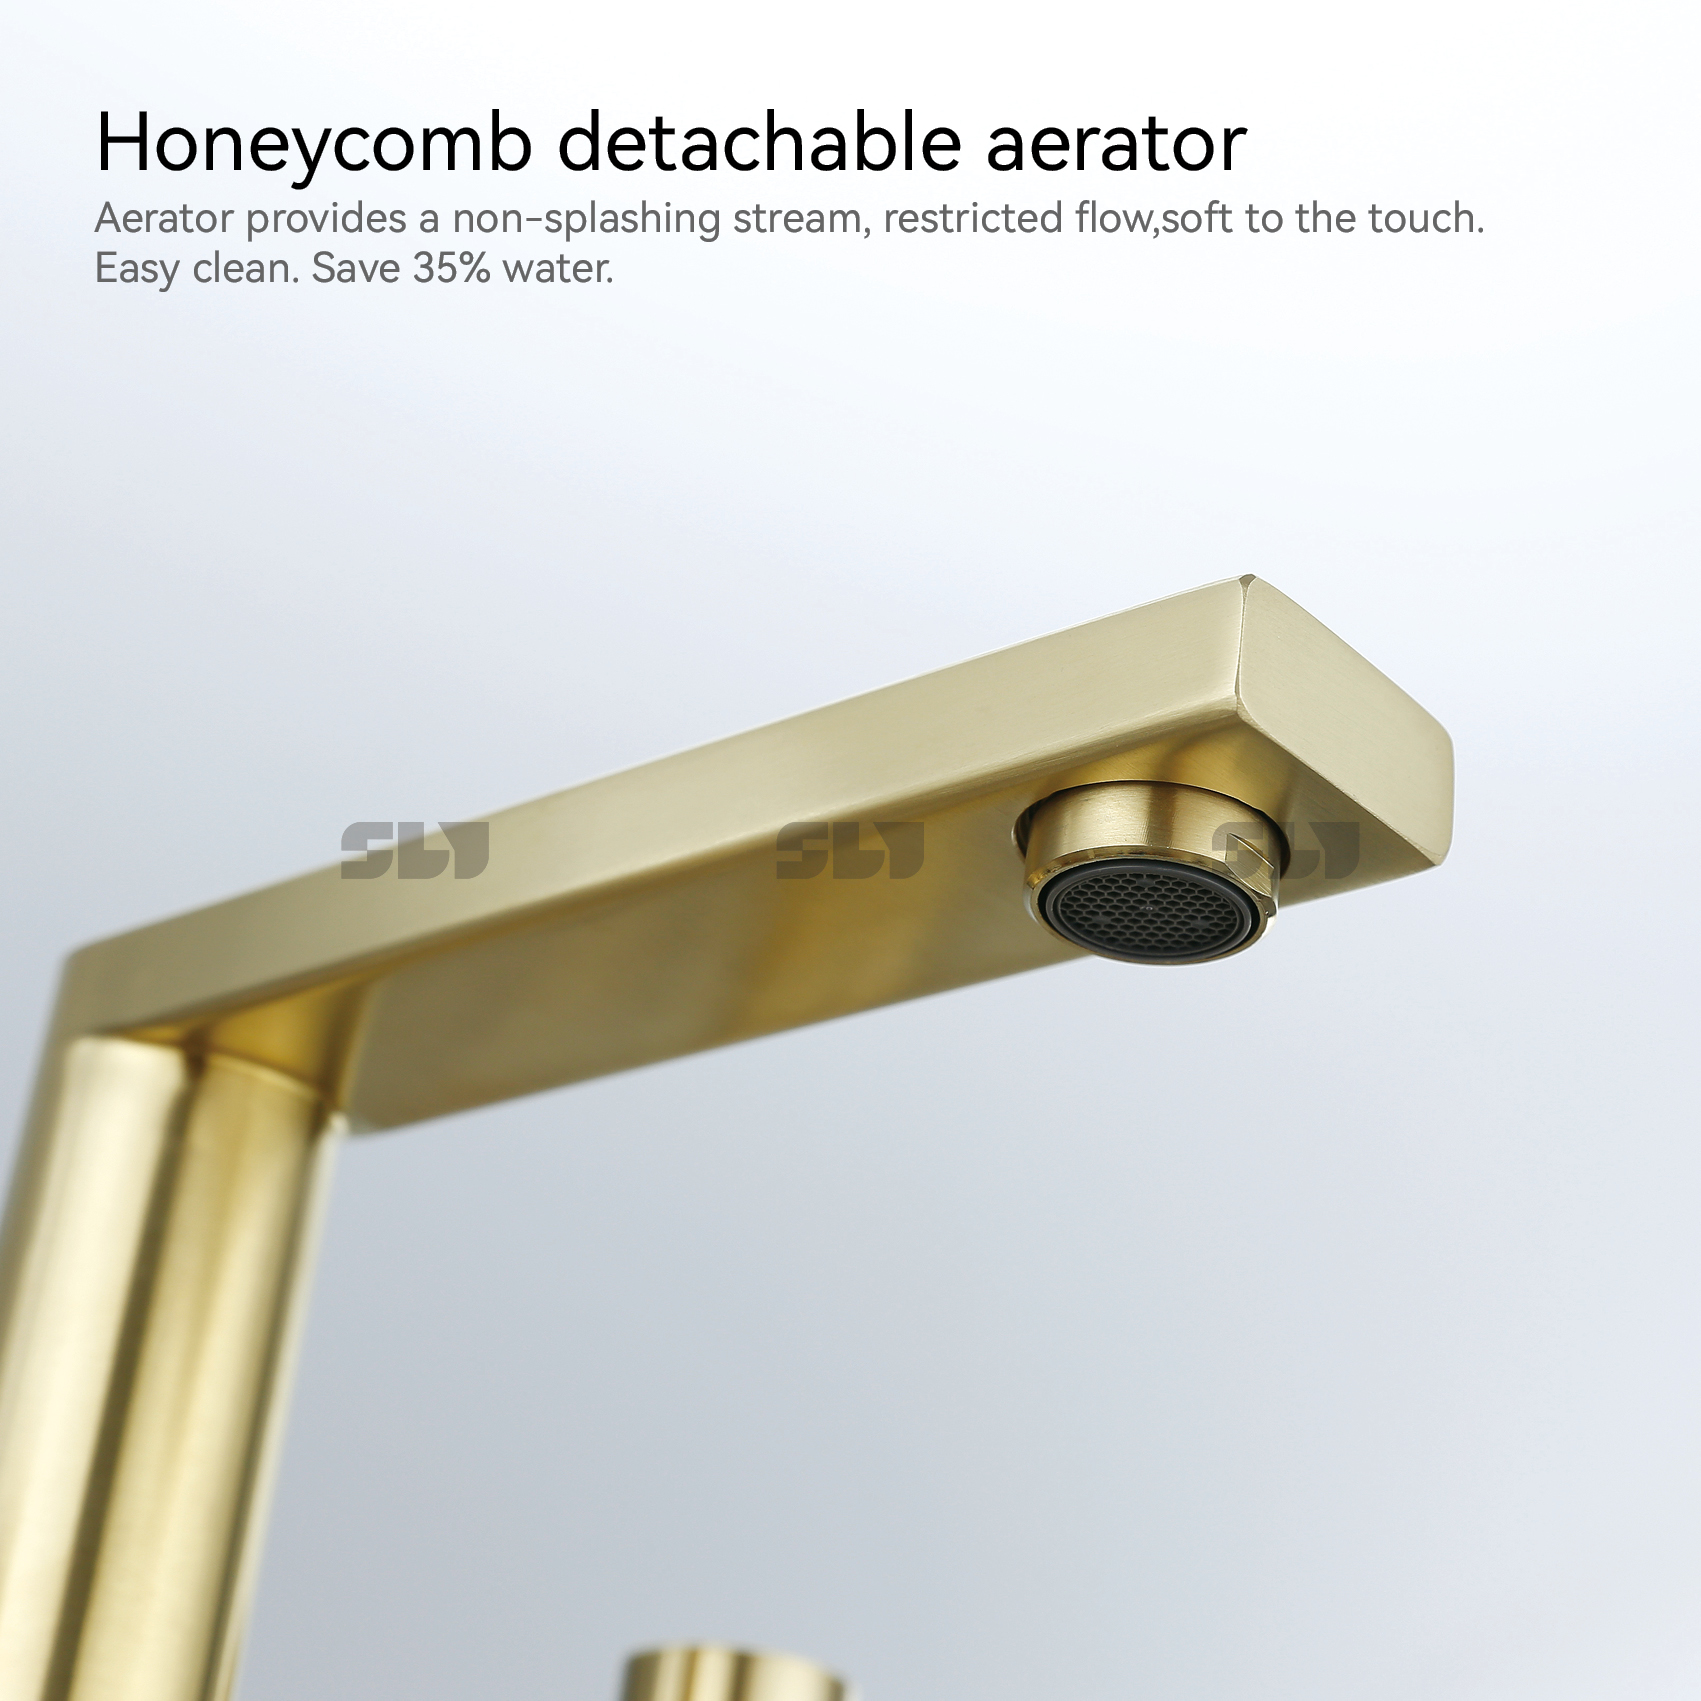 SLY Hot Sell Luxury Gold Double Handle Faucet